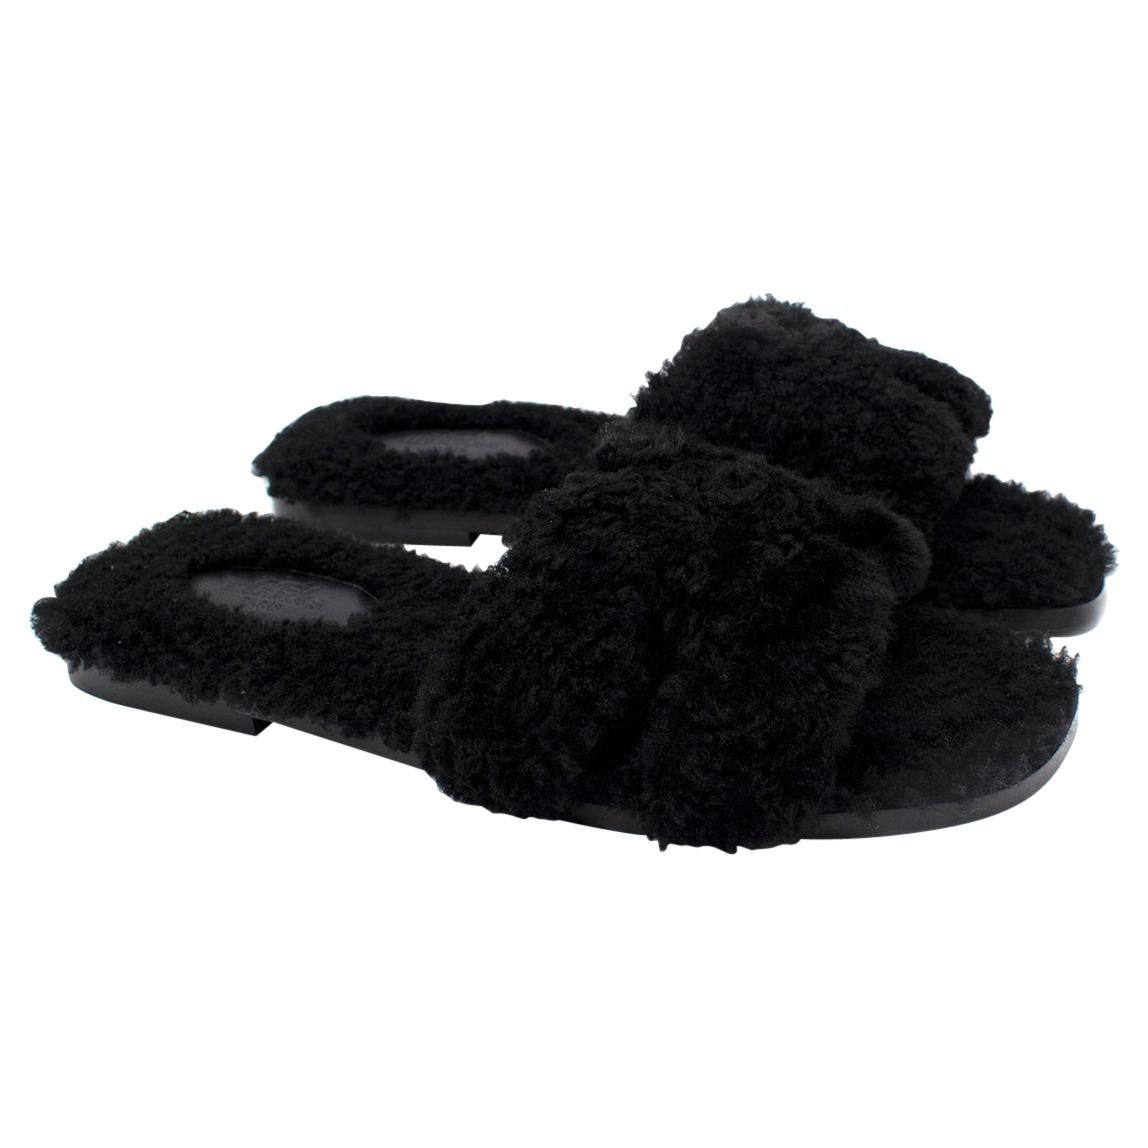 Hermes Black Fluffy Shearling Oran Sandals - Discontinued/Rare - Us size 7.5